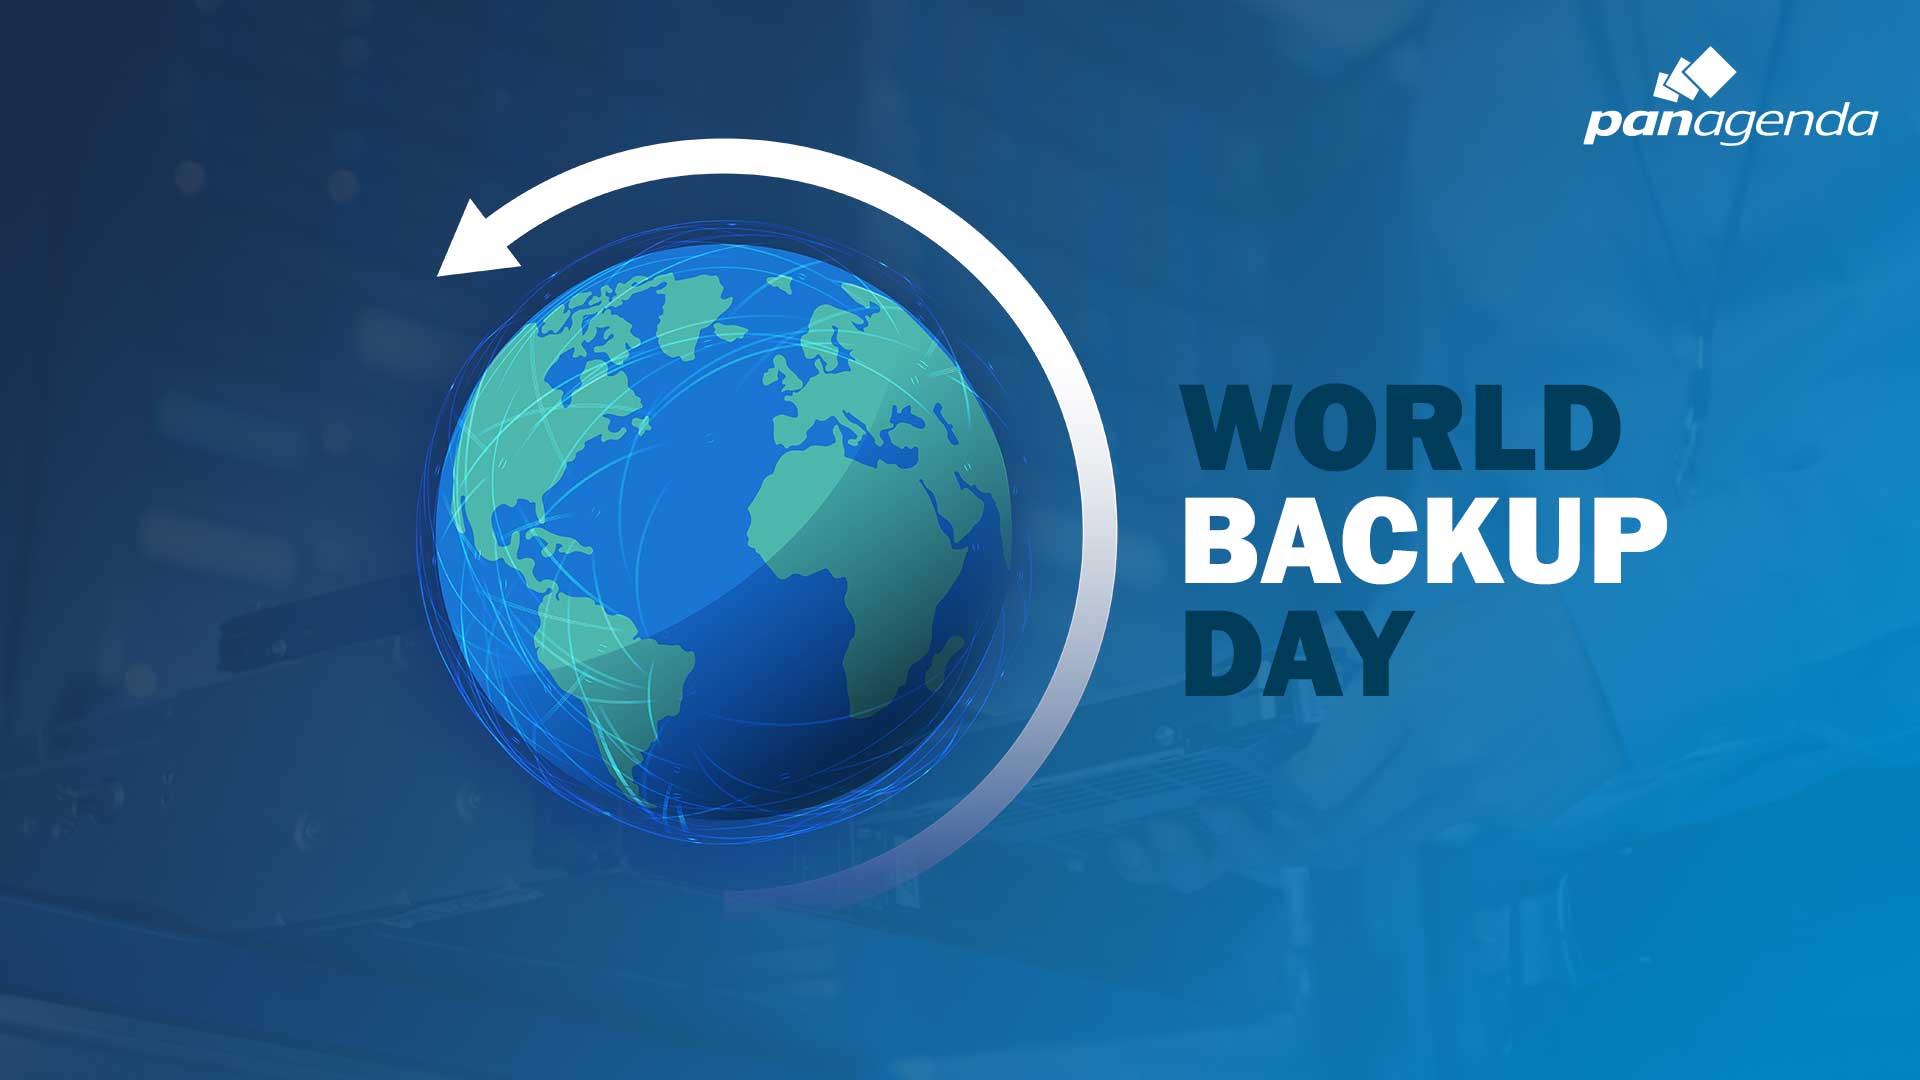 7 Best Practices for You at World Backup Day panagenda panagenda